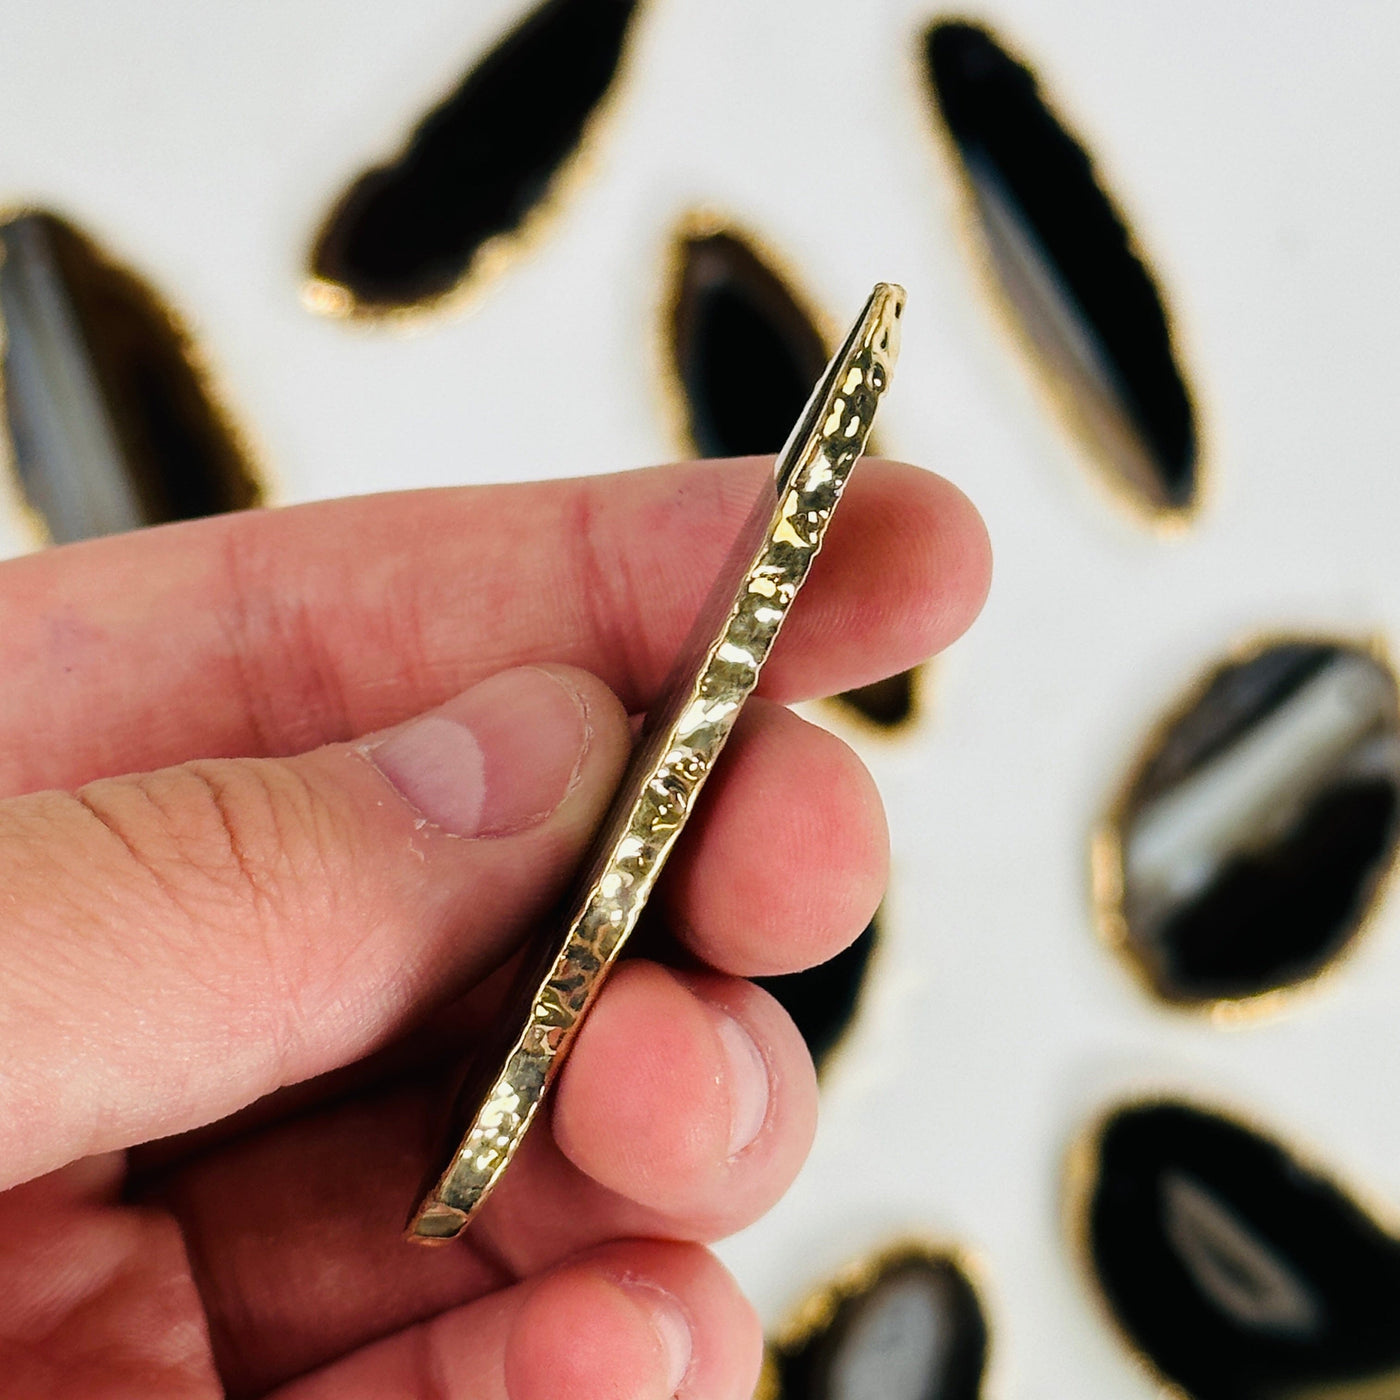 fingers holding up brown agate slice showing gold edge and thickness with others in the background